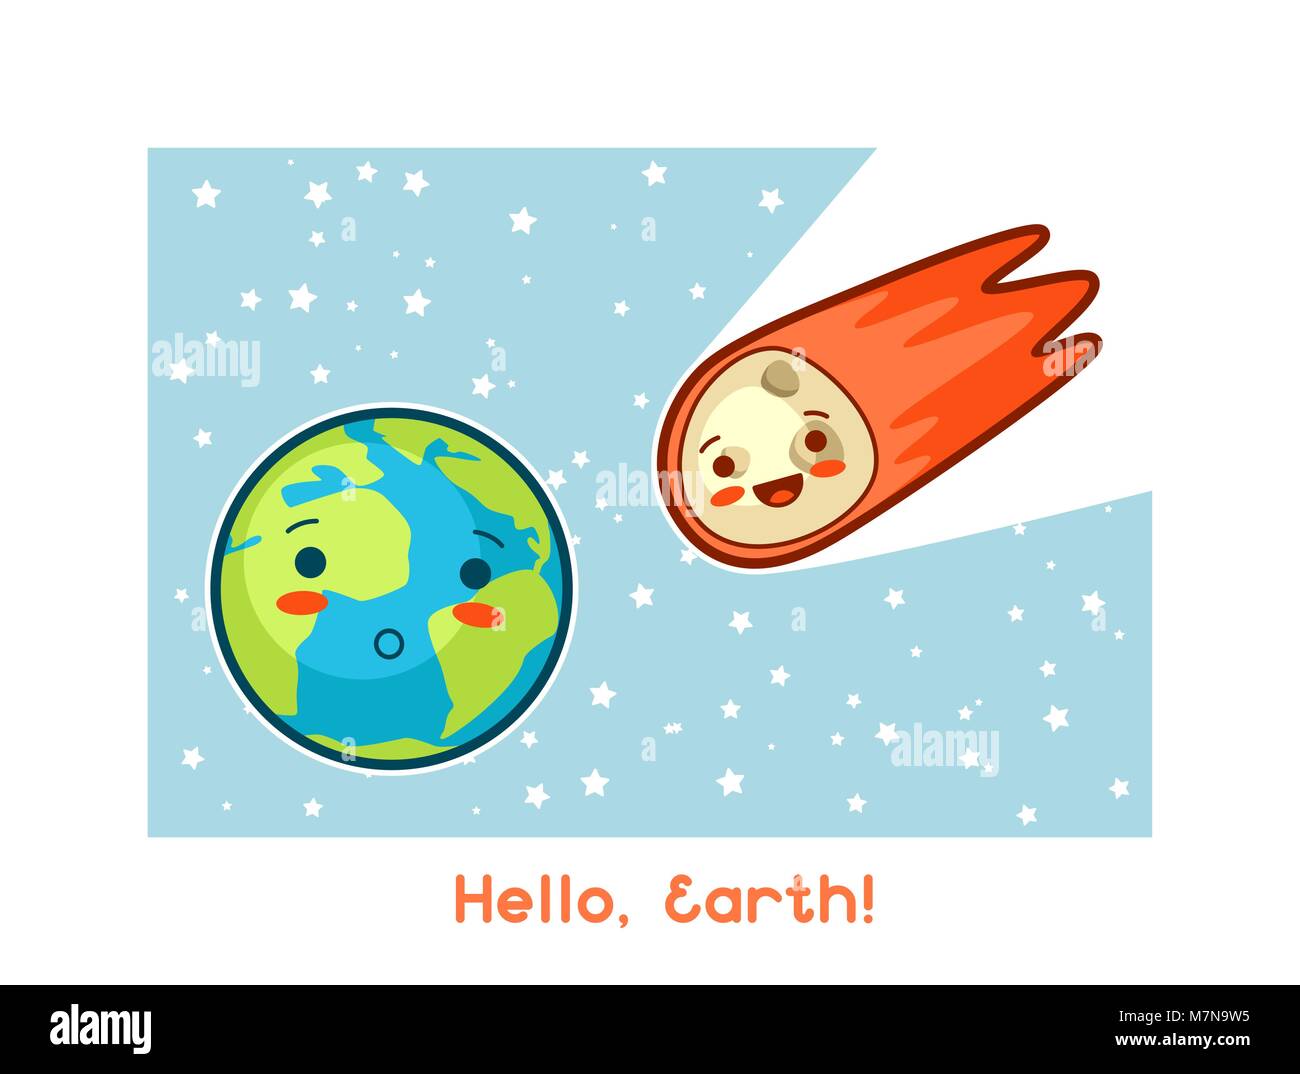 Hello, Earth. Kawaii space funny card. Doodles with pretty facial expression. Illustration of cartoon earth and asteroid Stock Vector